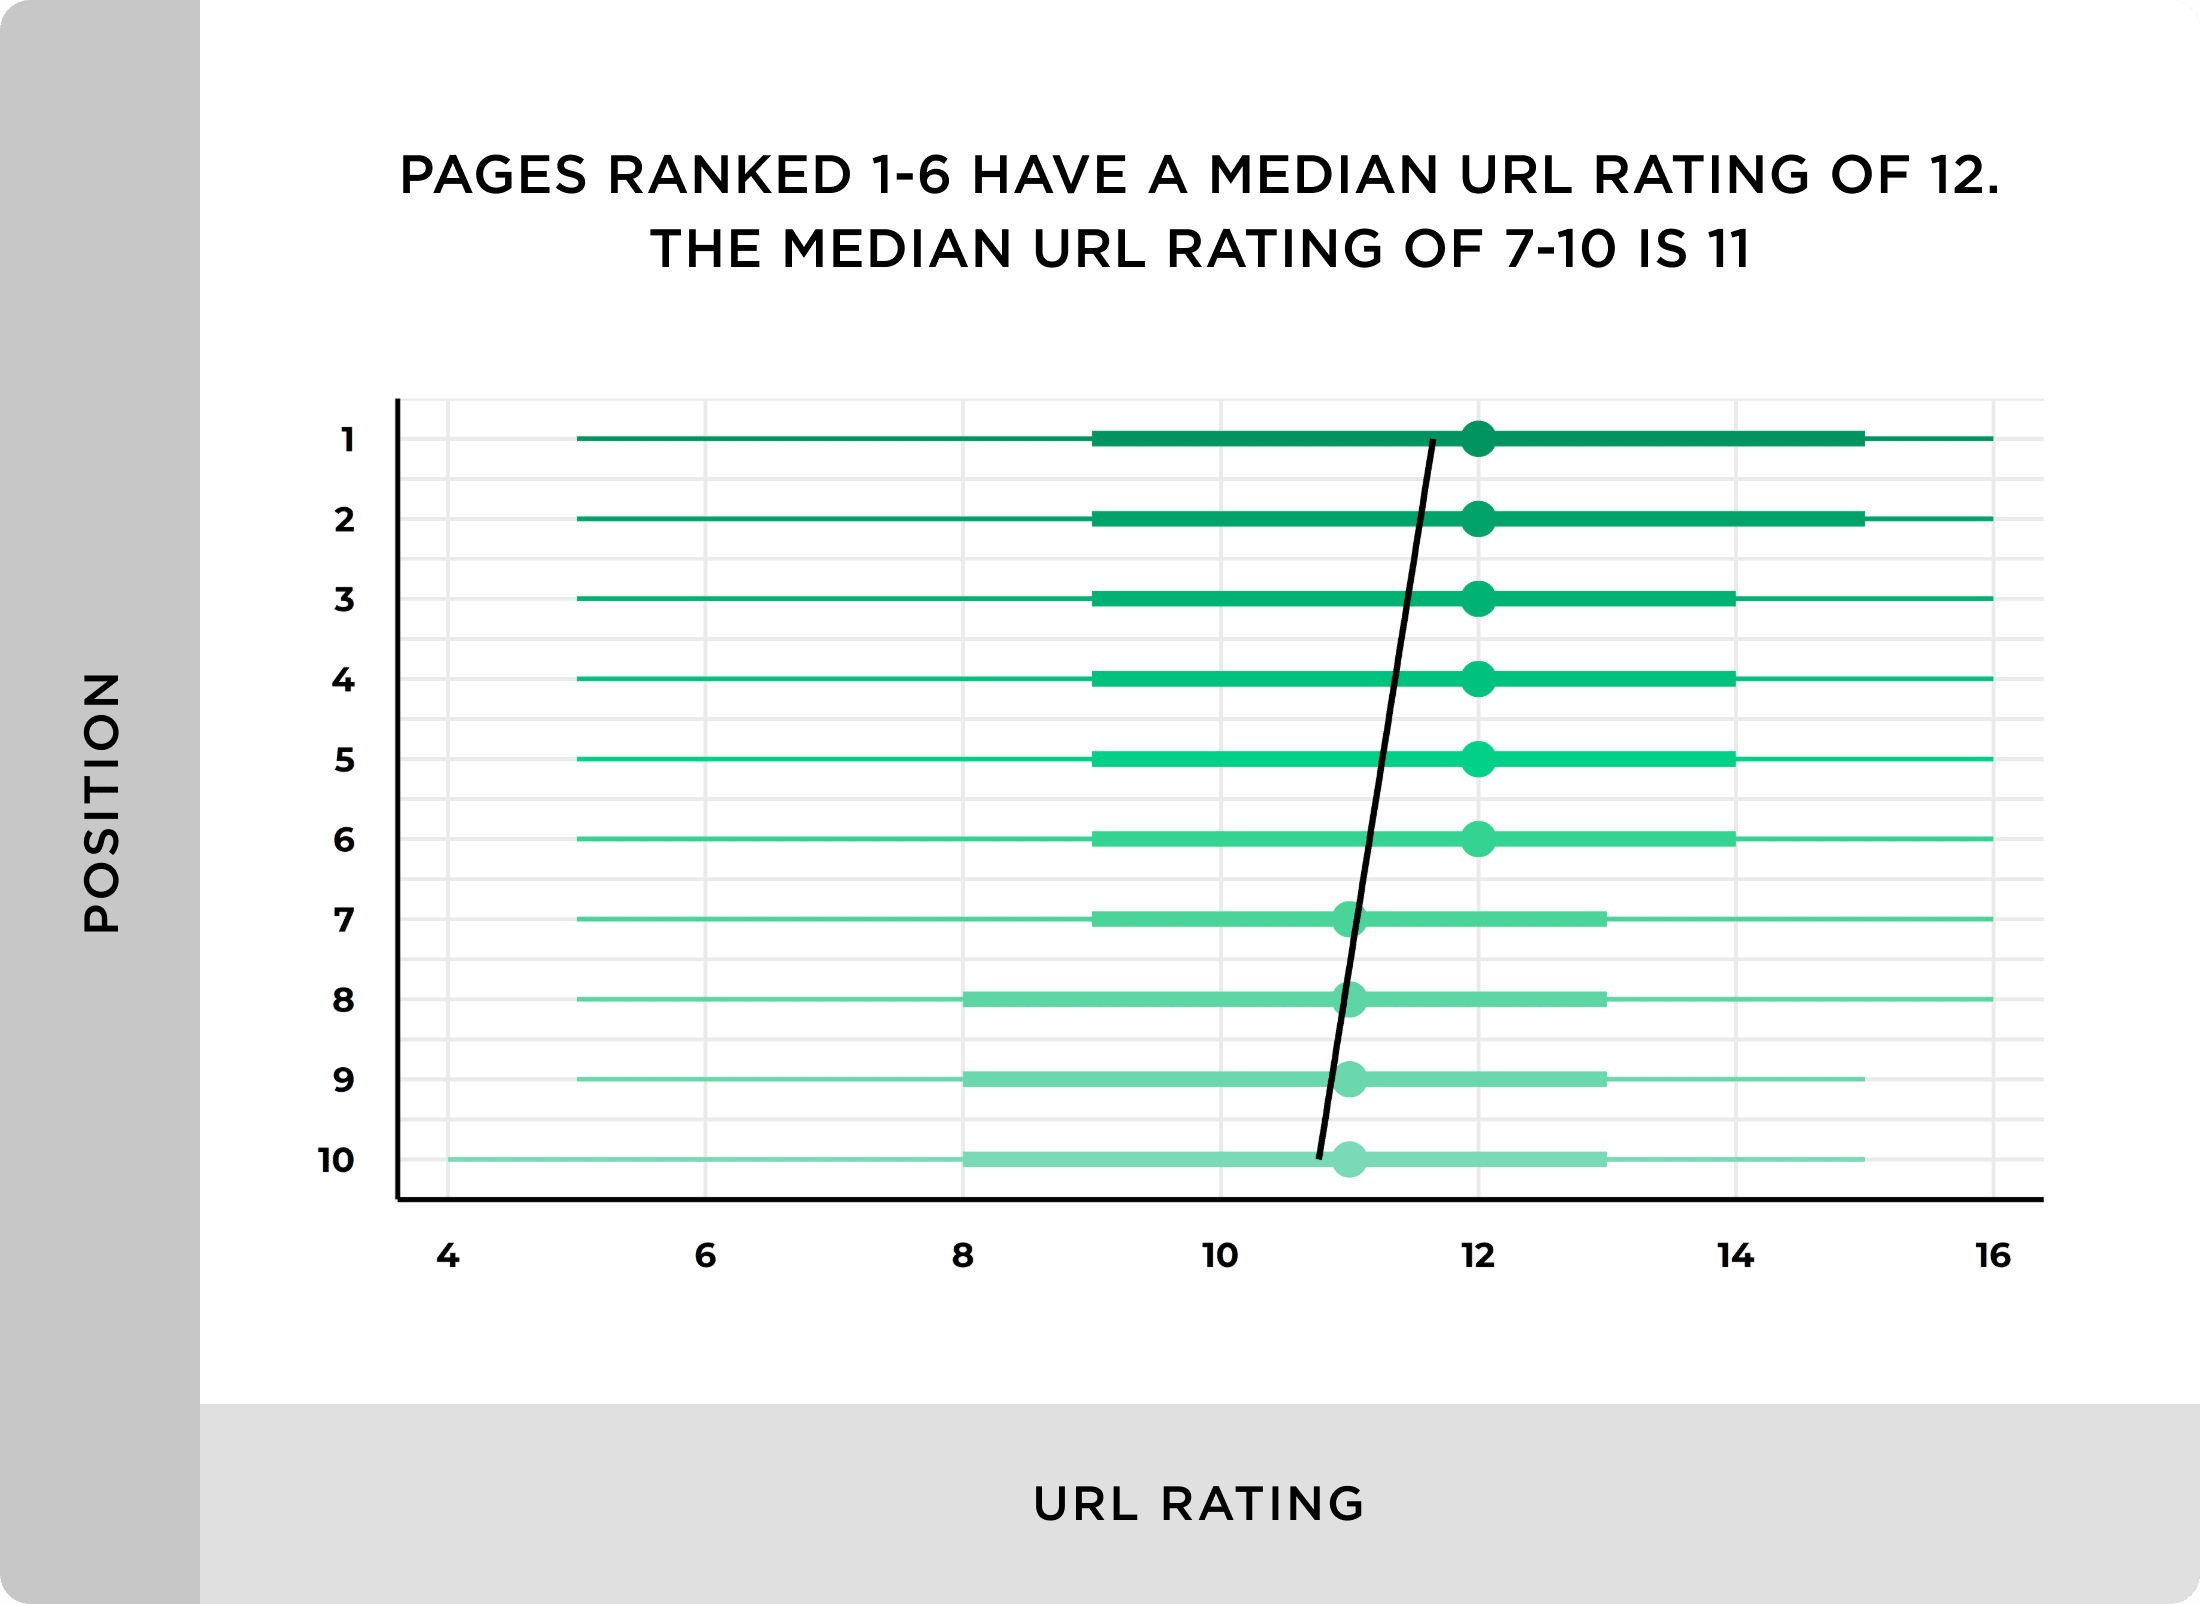 Pages ranked 1-6 have a median URL Rating of 12. The median URL Rating of 7-10 is 11